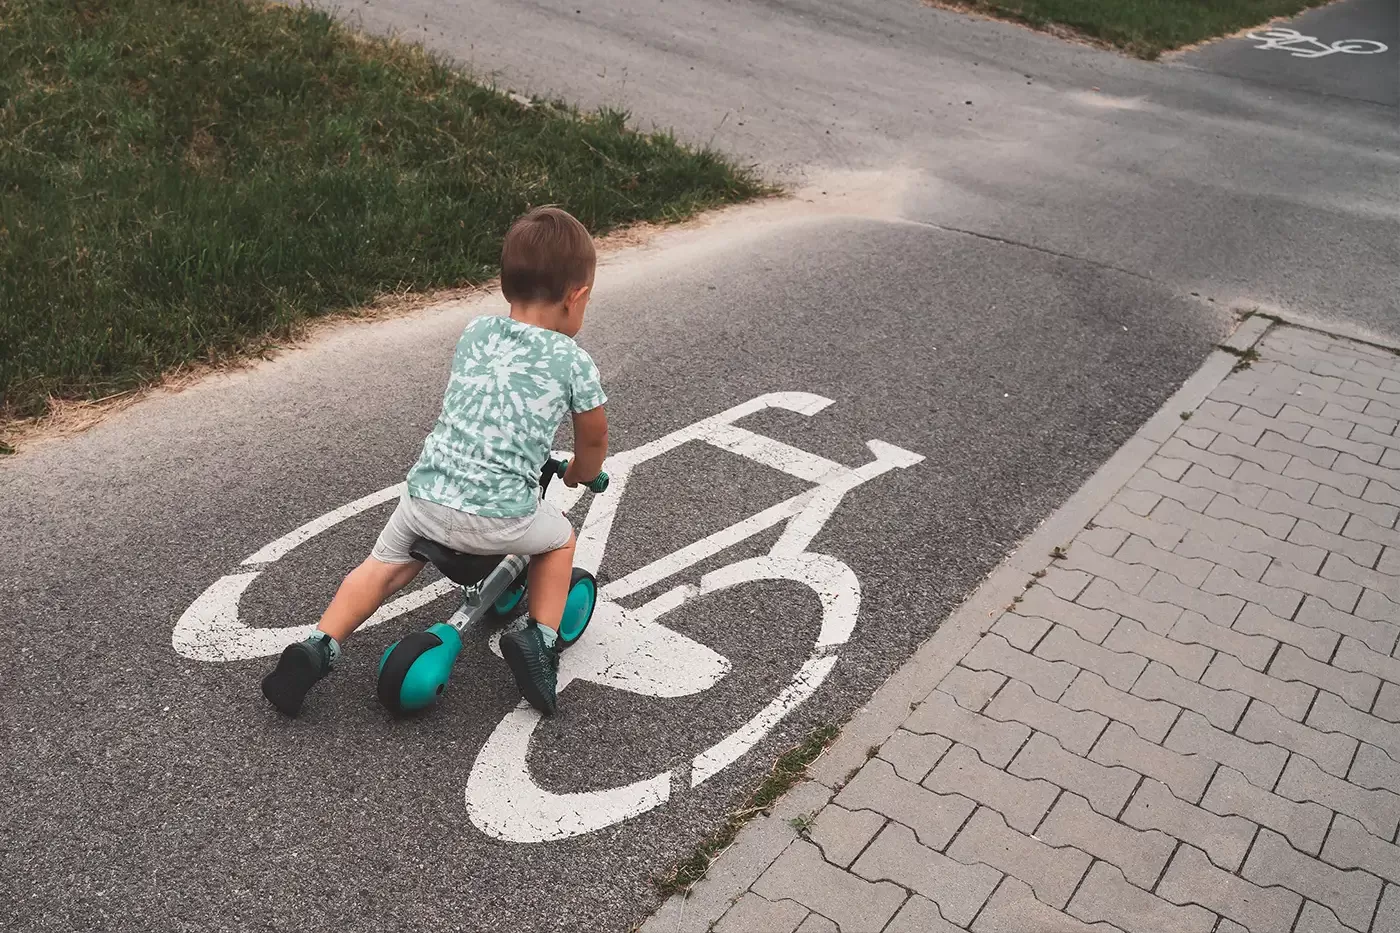 Photo of a young child on a bicycle